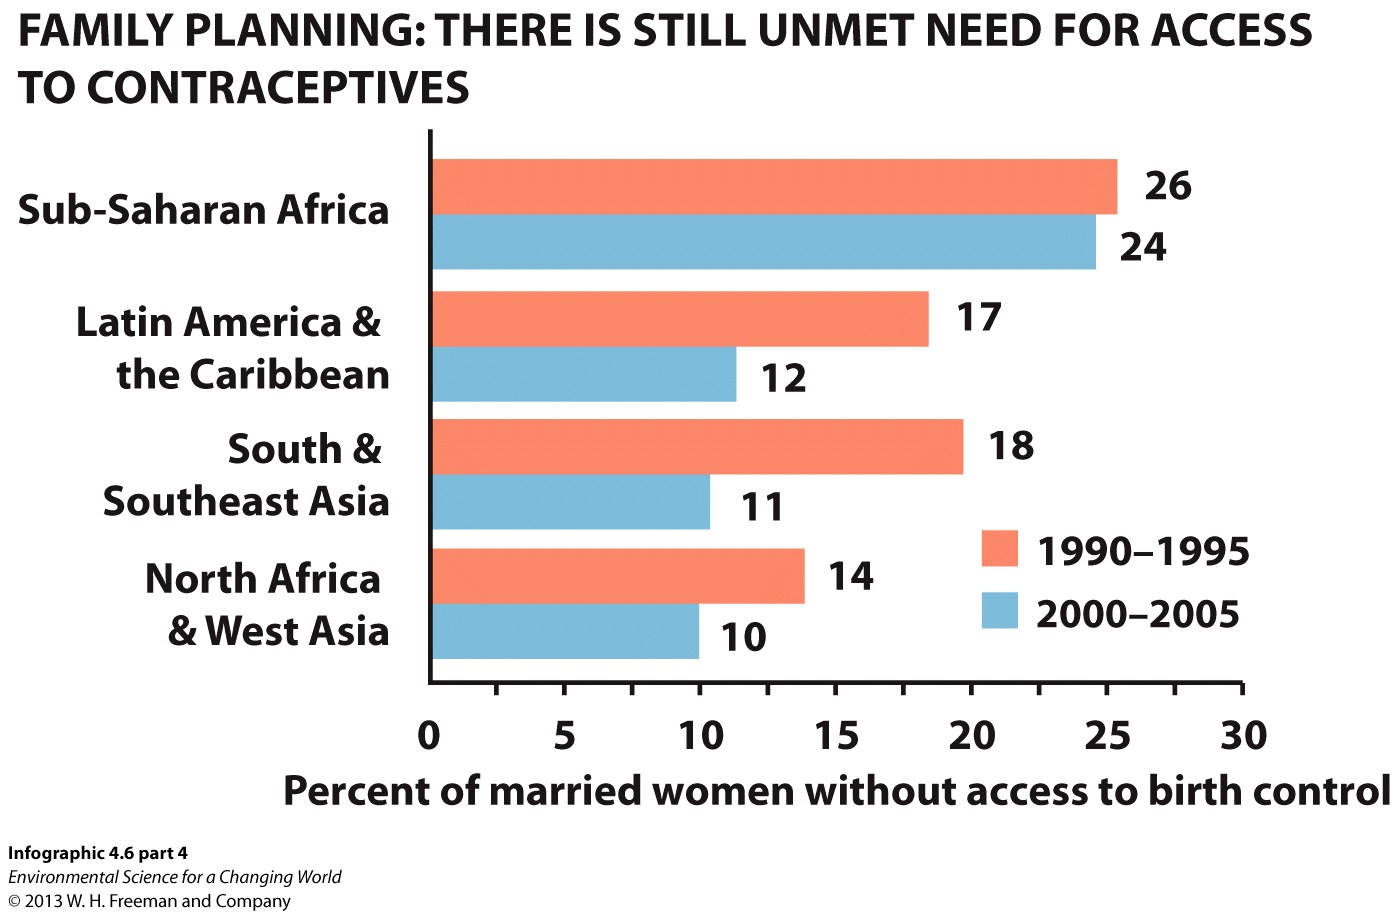 Infographic 4.6: As Education of Women Increases, TFR Decreases